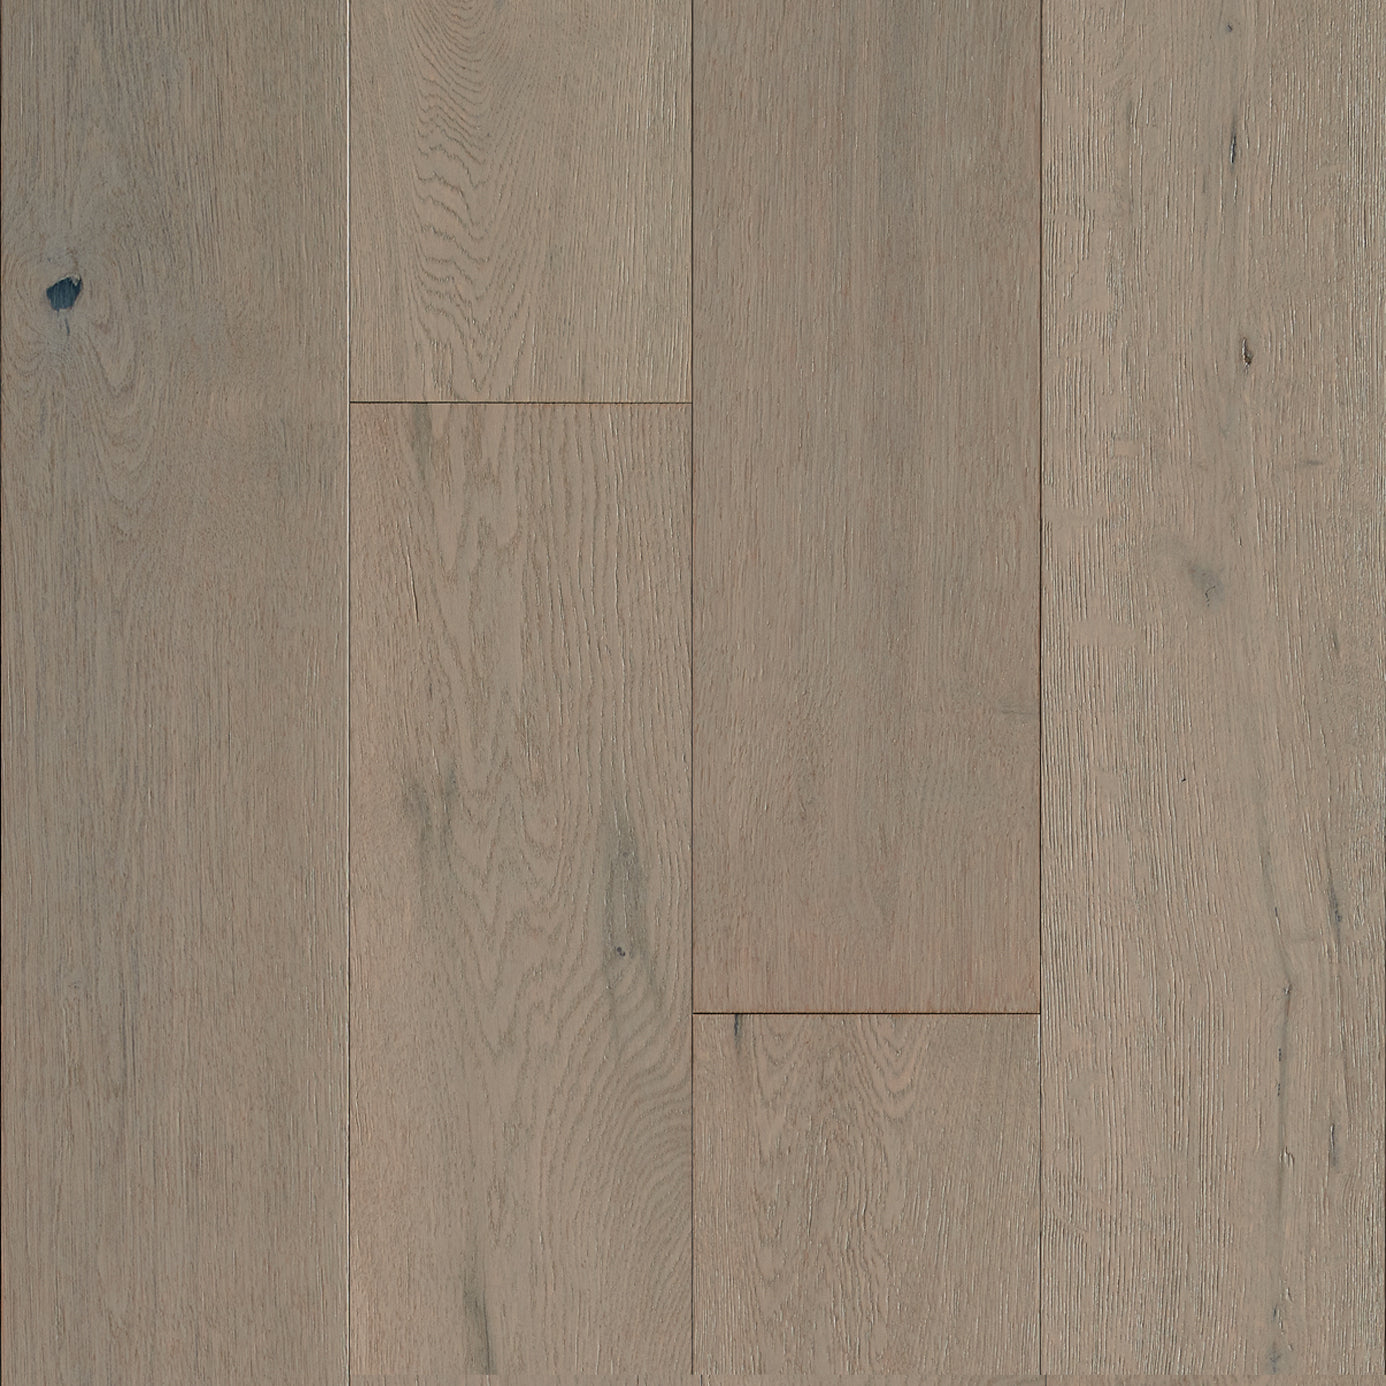 Bruce - Brushed Impressions Silver Collection - 6.5 in. Oak Hardwood - Breezy Gray